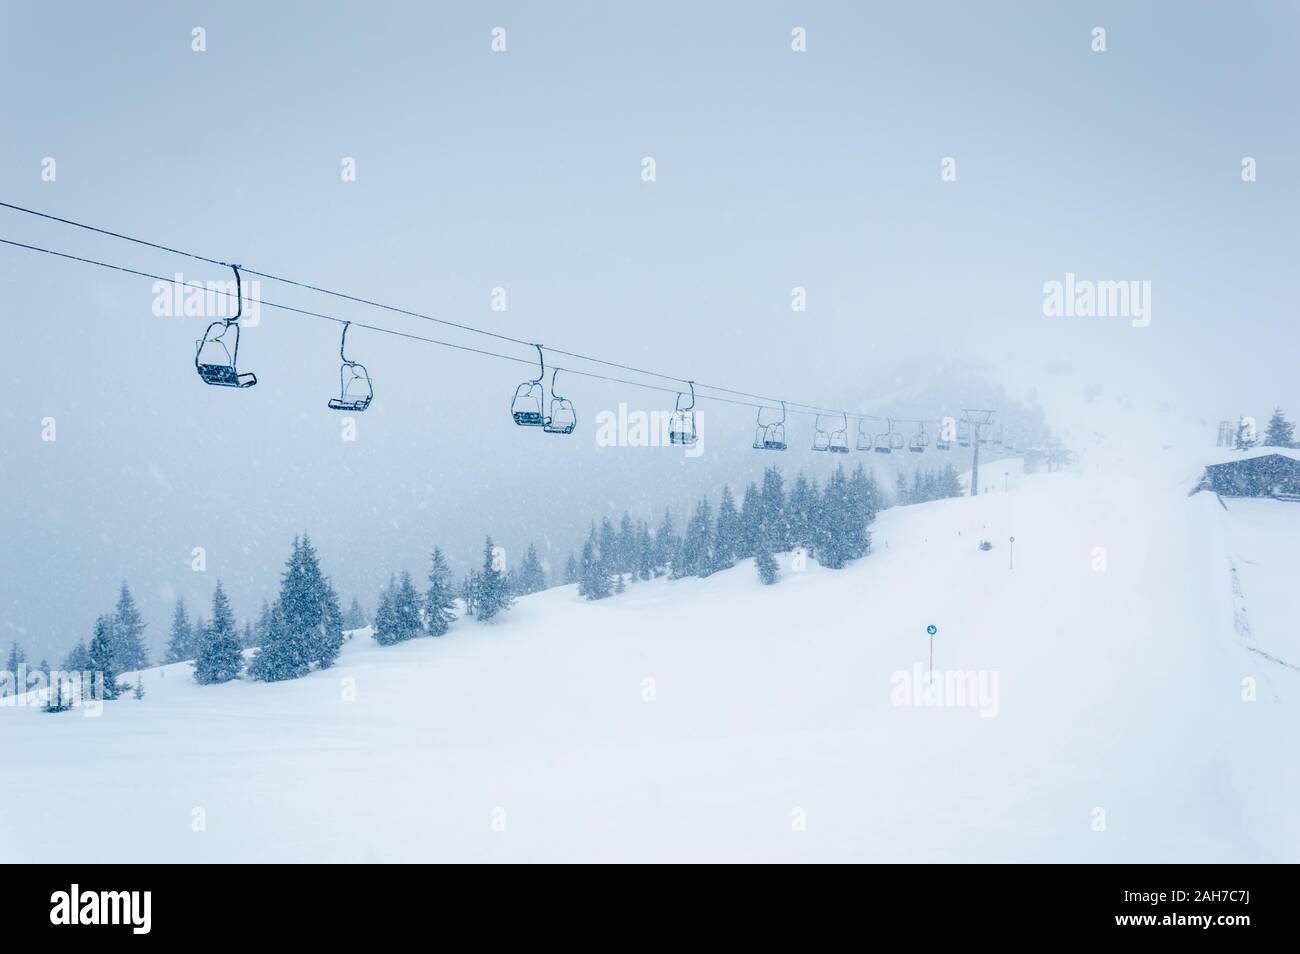 Ski lift in snowfall in mountains ski resort Zell am See Kaprun, Austria. White winter landscape with chairlifts and ski piste with snow and fir tree Stock Photo